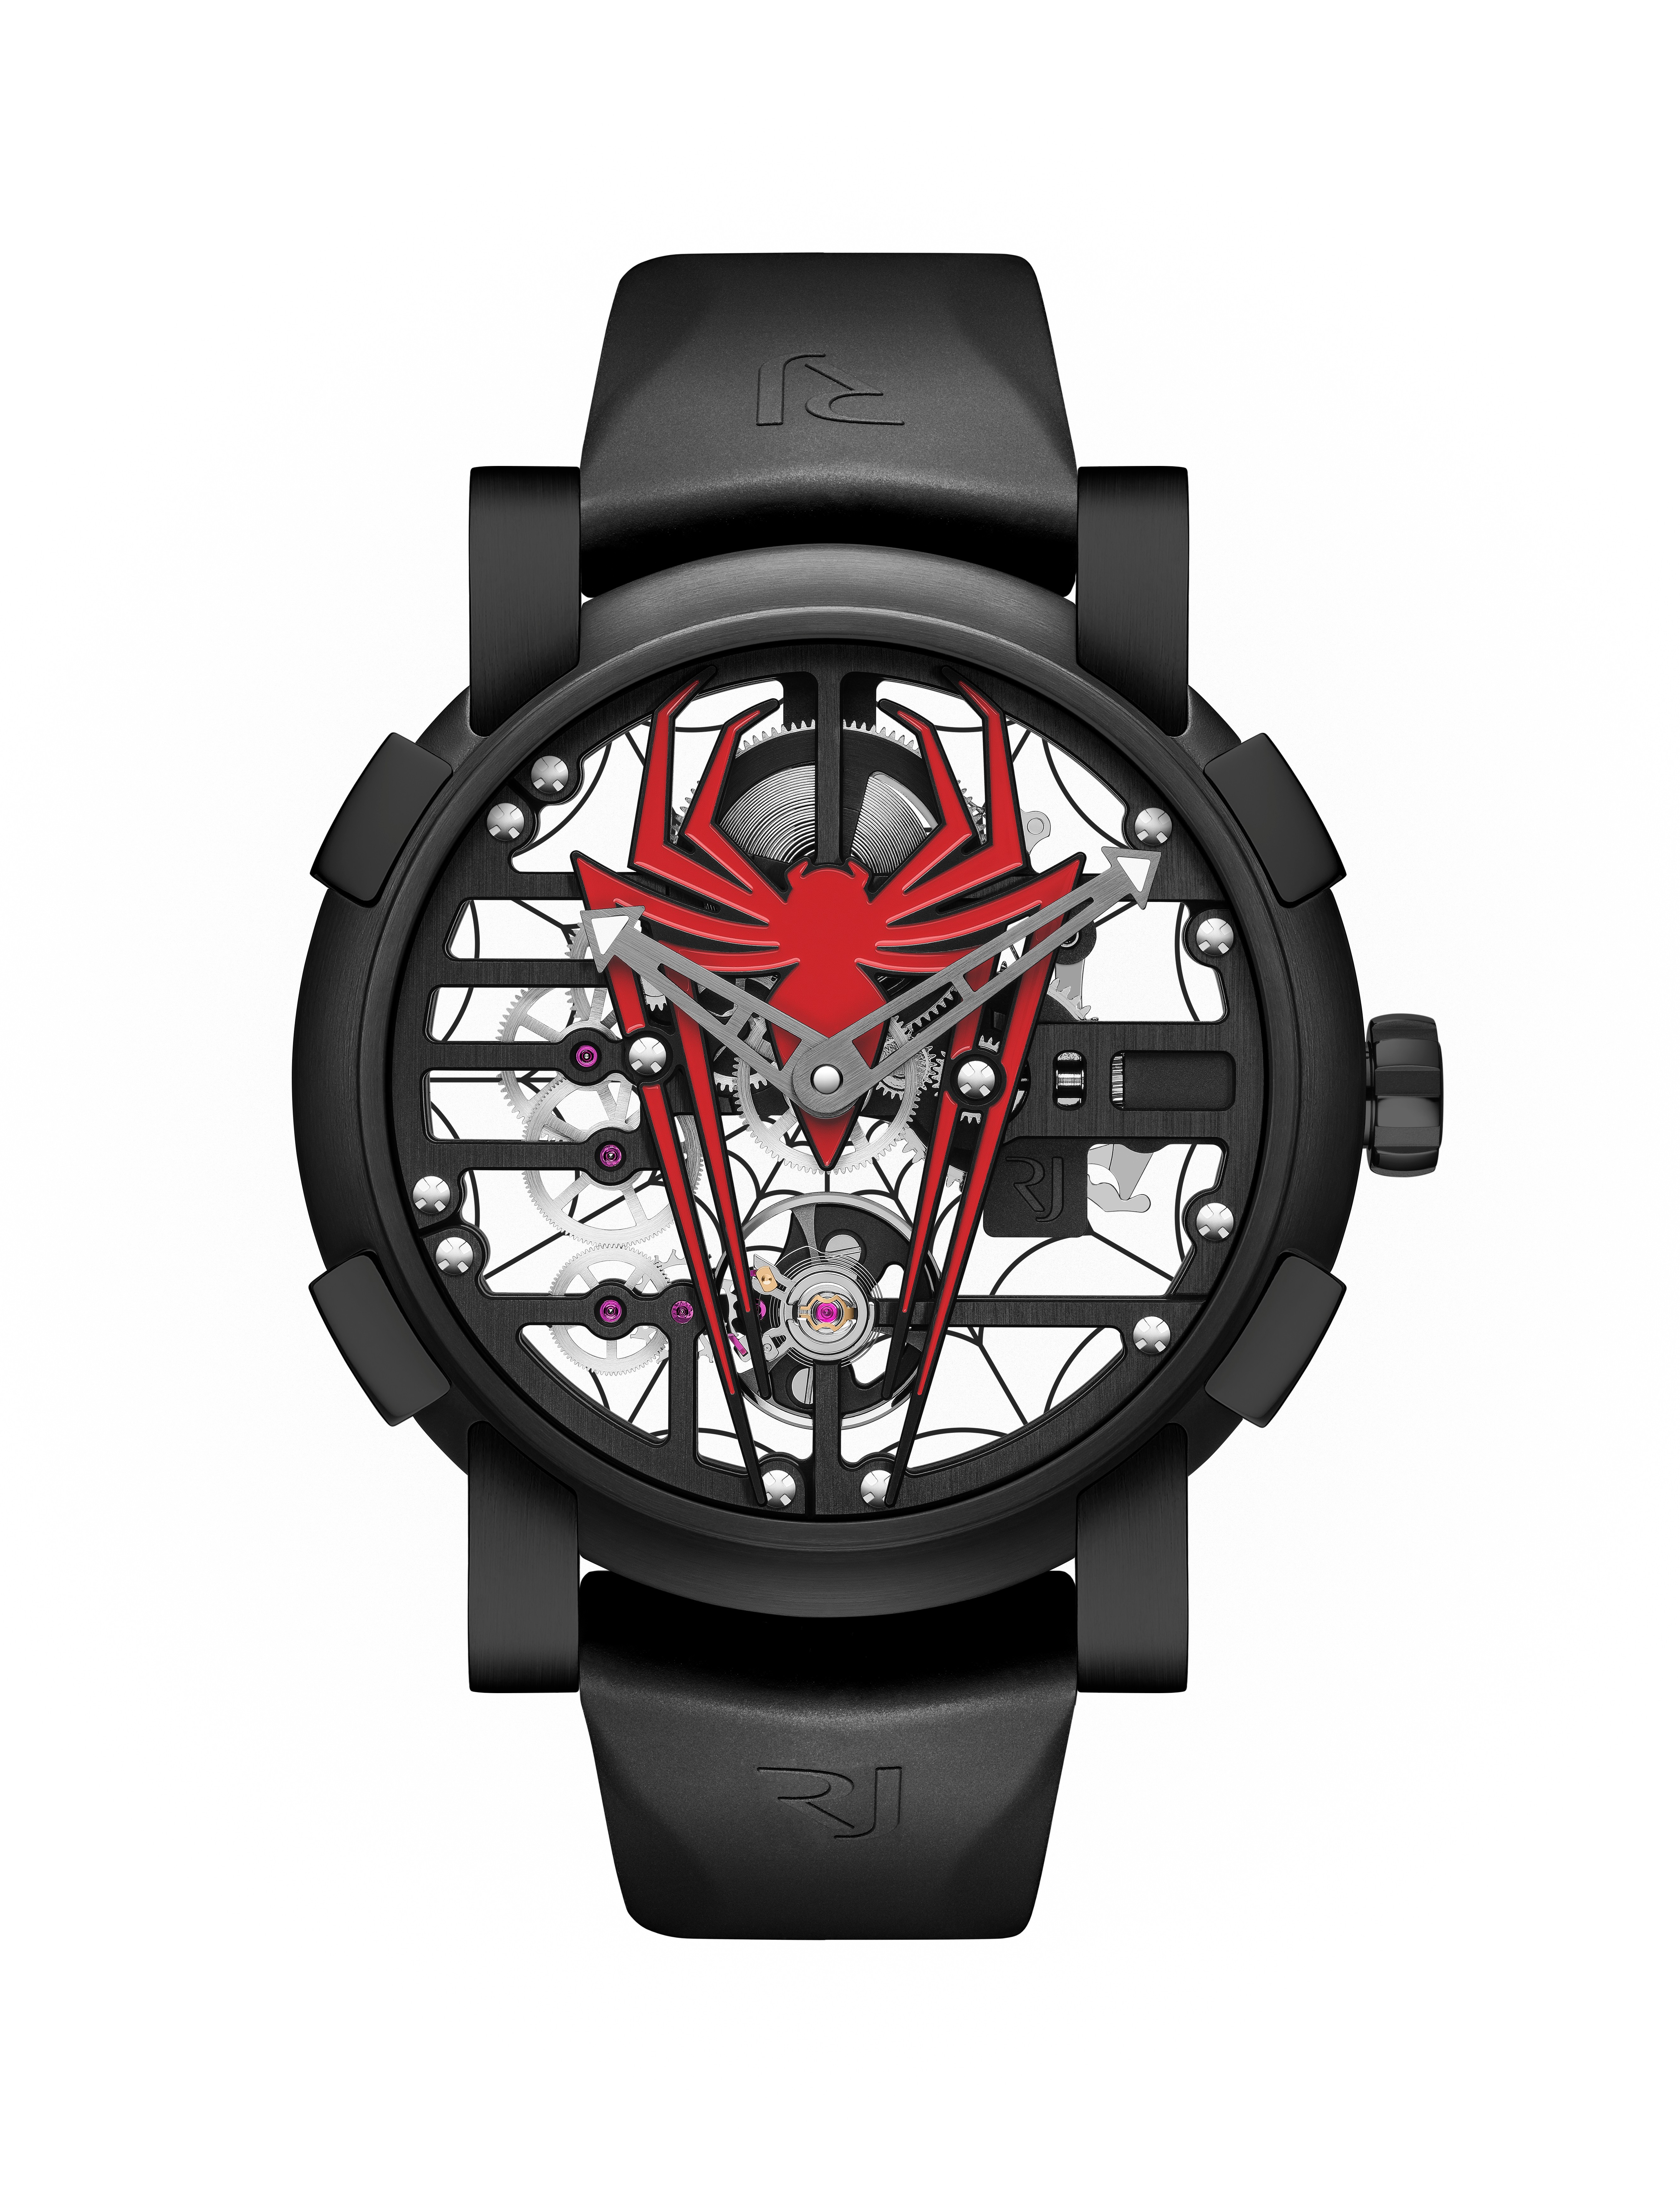 Romain Jerome x Spider-Man is limited to 75 pieces.